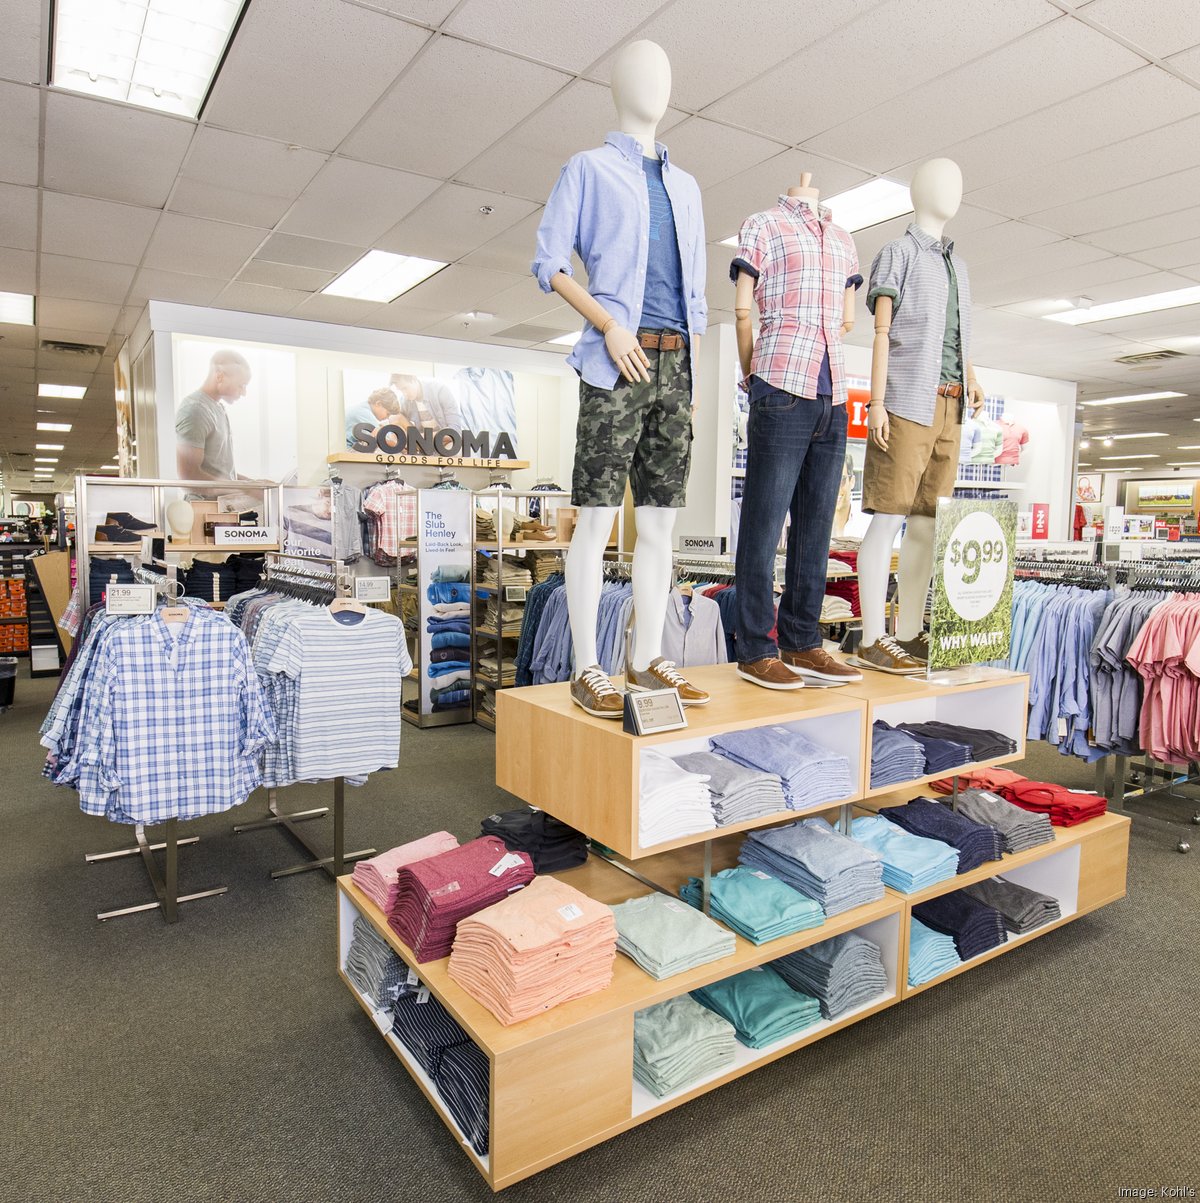 Big Changes? Major News for Every Kohl's Shopper in NJ